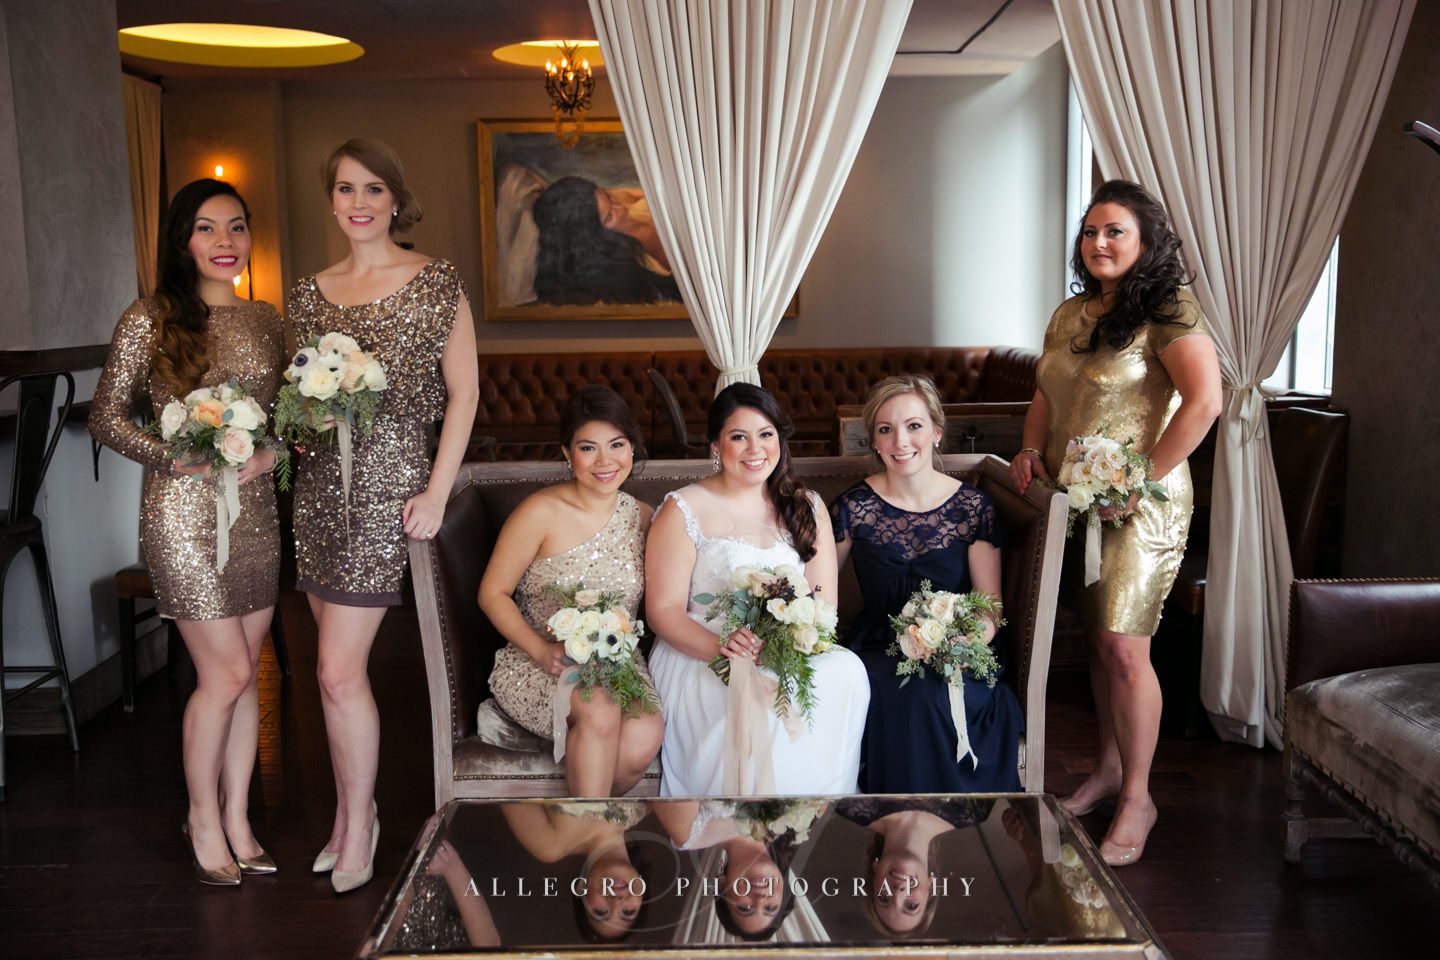 the girls (reflection) with lots of sparkle for this winter wedding -photo by Allegro Photography